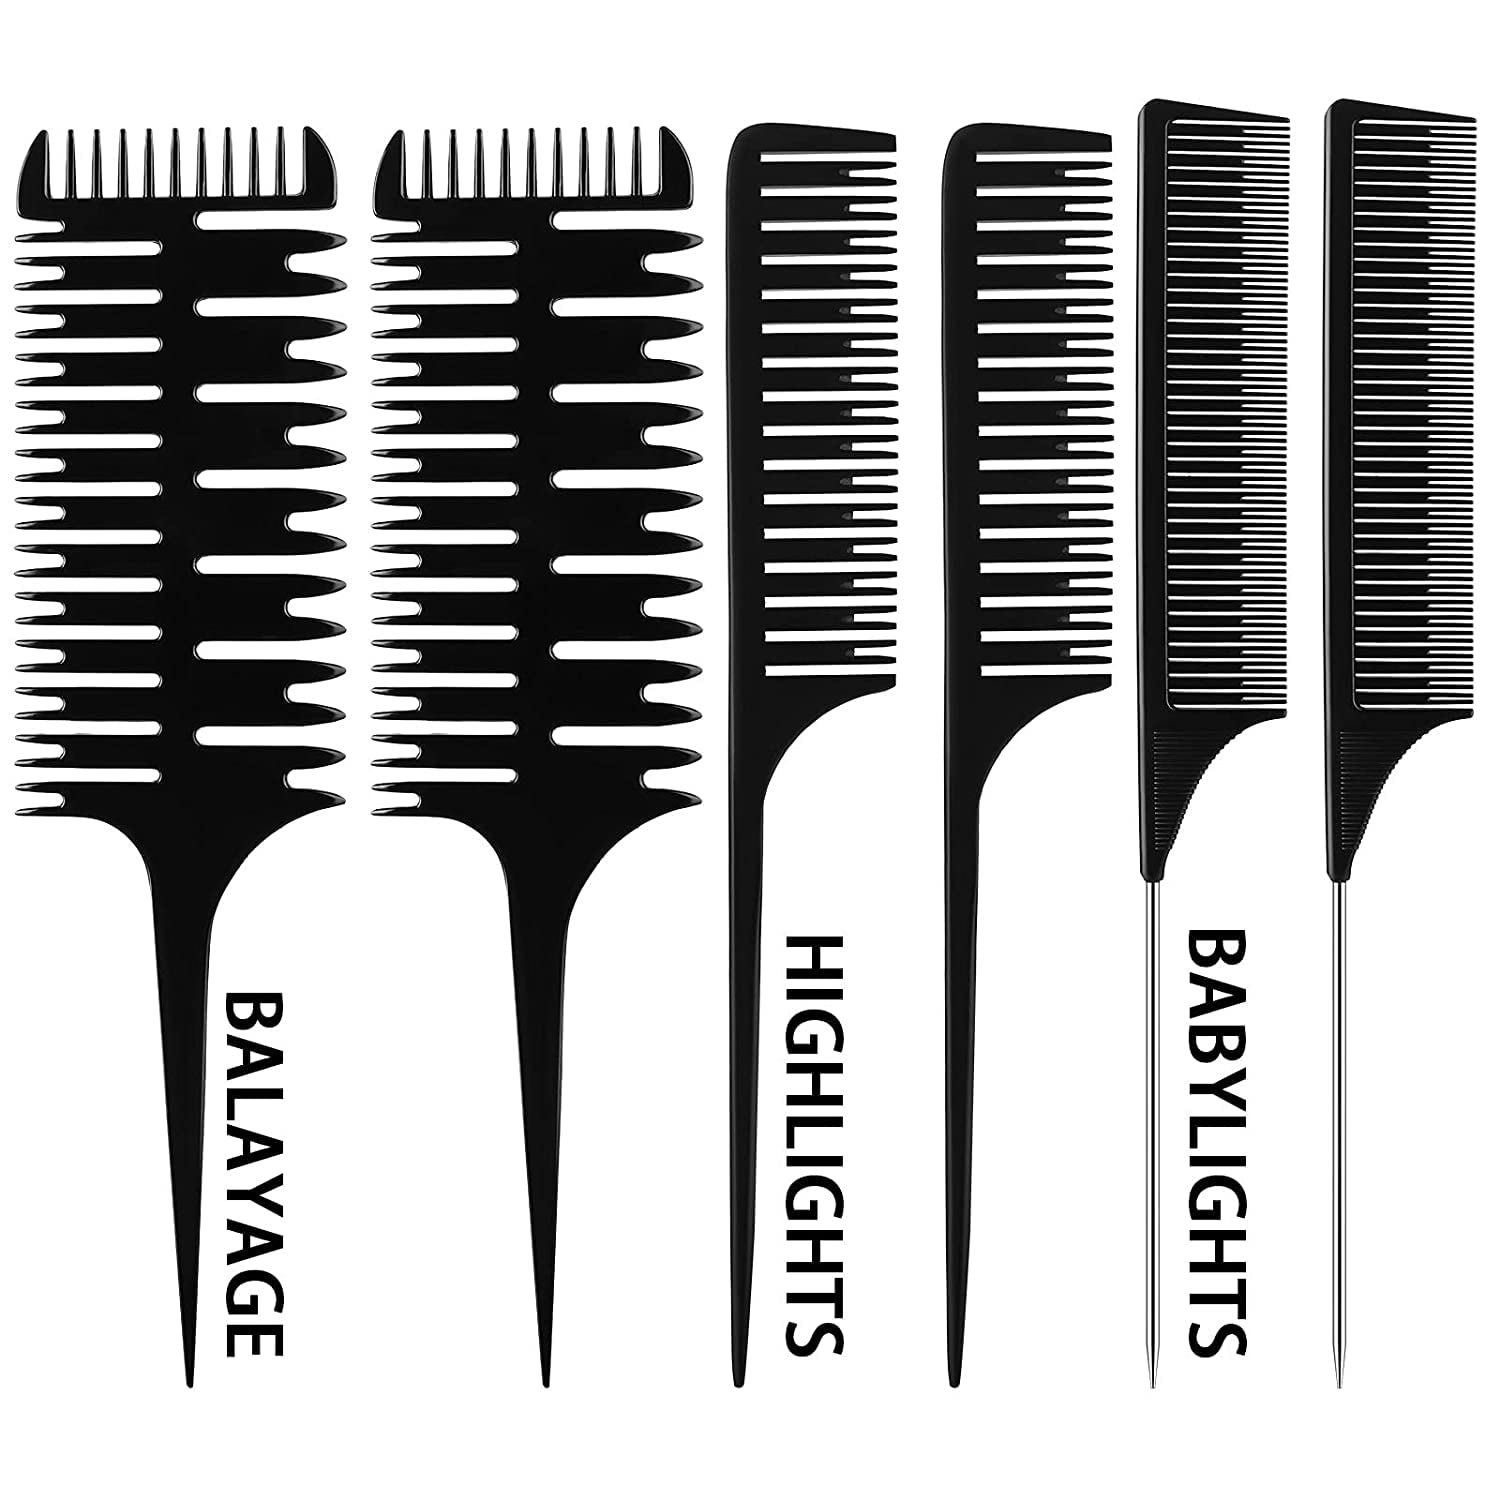 2-Way Weaving & Sectioning Foiling Comb Coloring, Highlighting